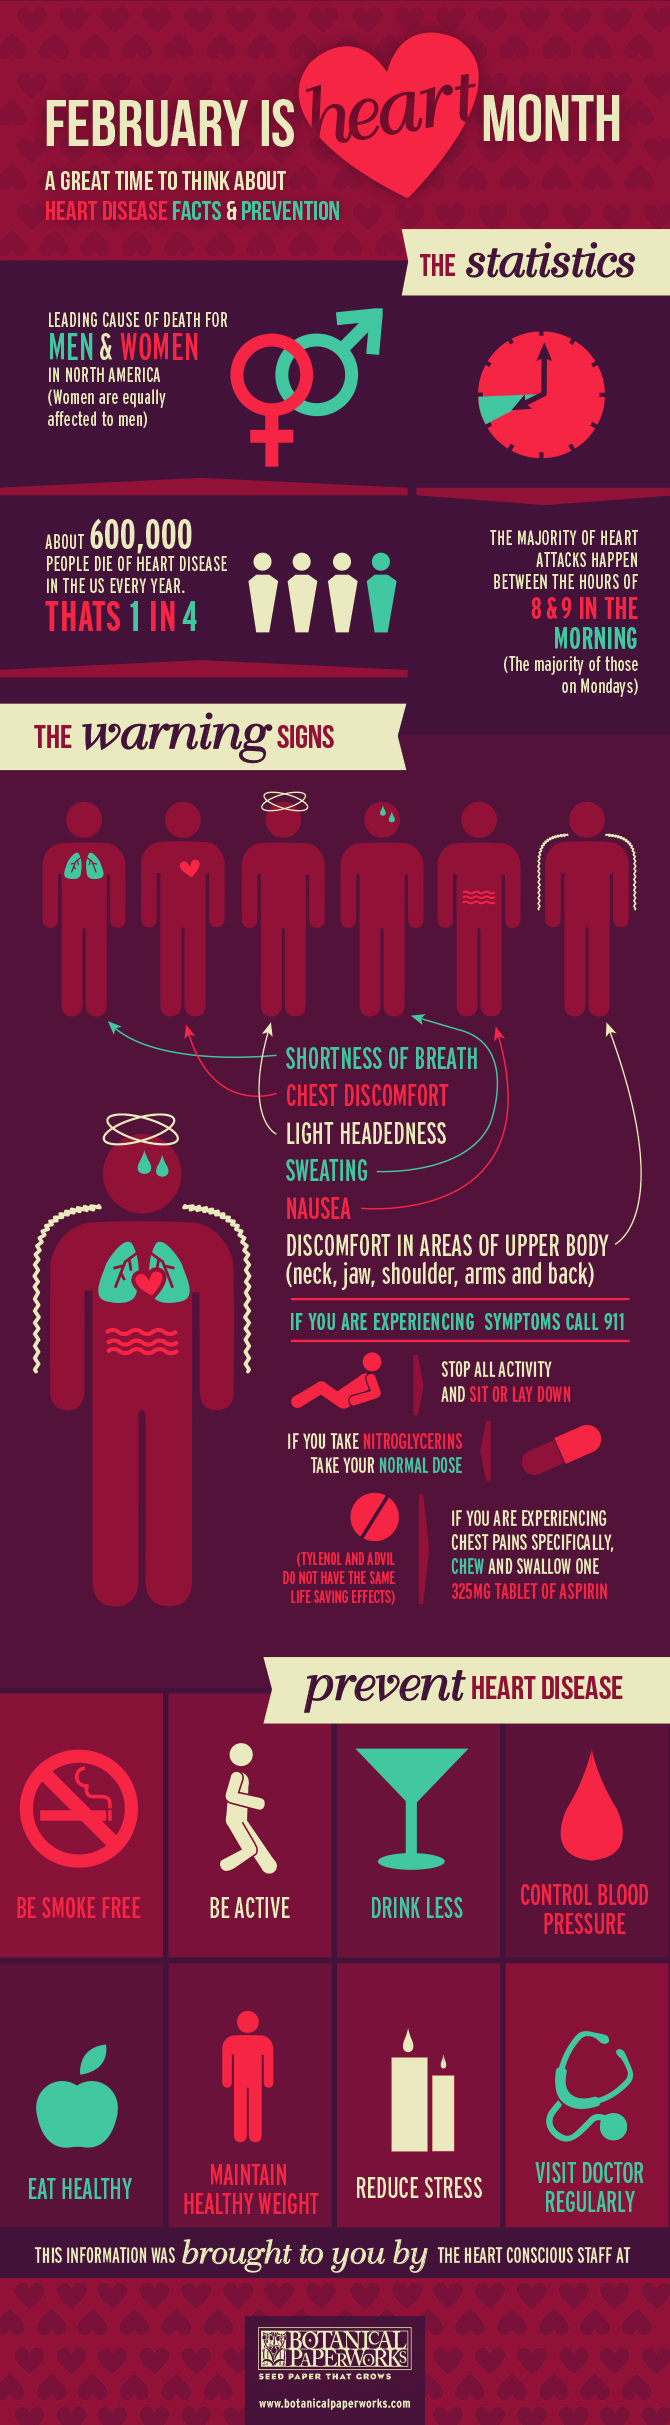 Heart Health Month Infographic from Botanical PaperWorks